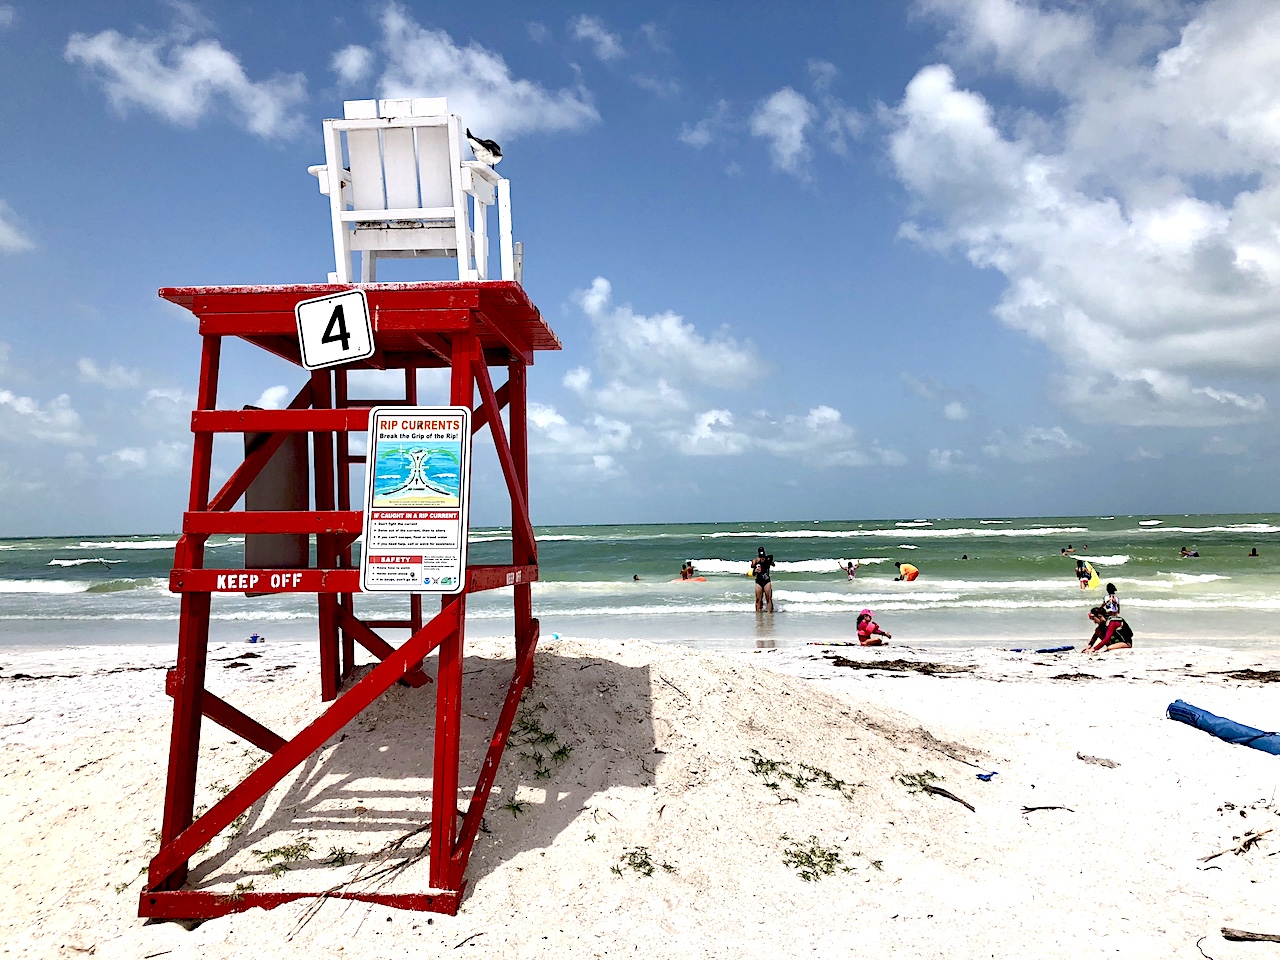 Fort de Soto beach offers amazing service, including lifeguards most of the year